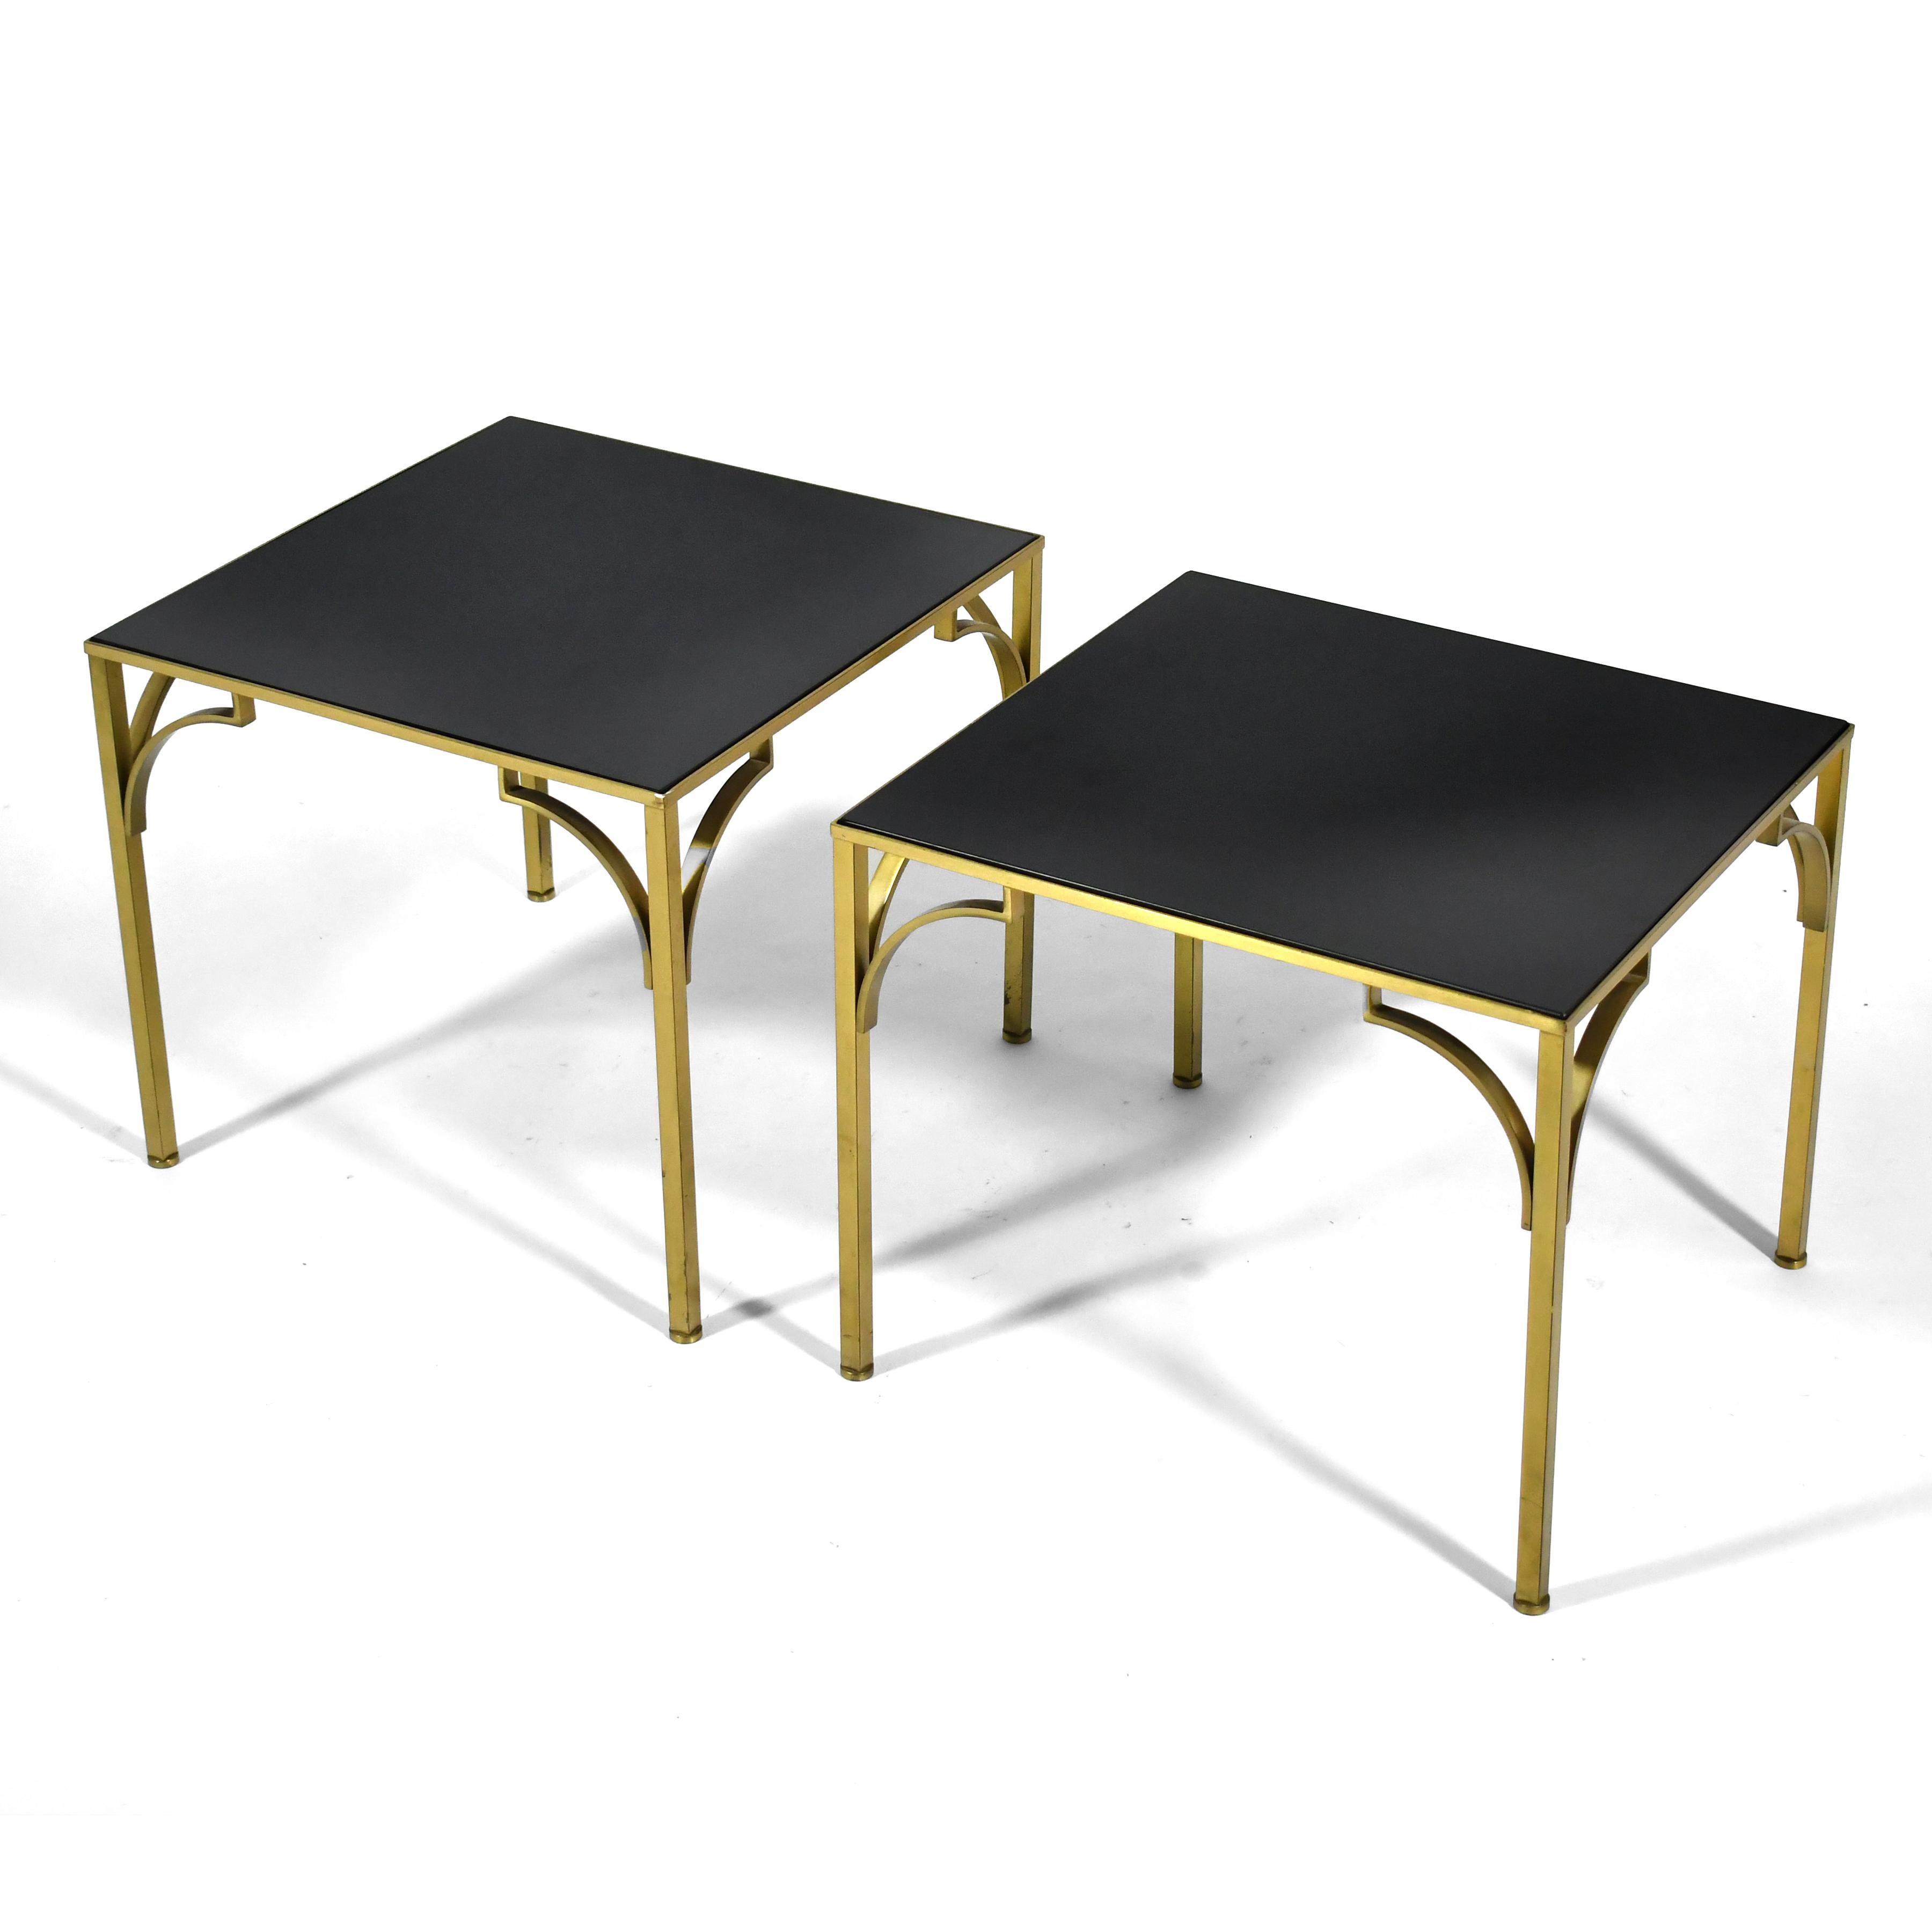 This handsome pair of German end tables have exquisitely crafted brass bases which support inset tops of black Detopak glass.

16.5